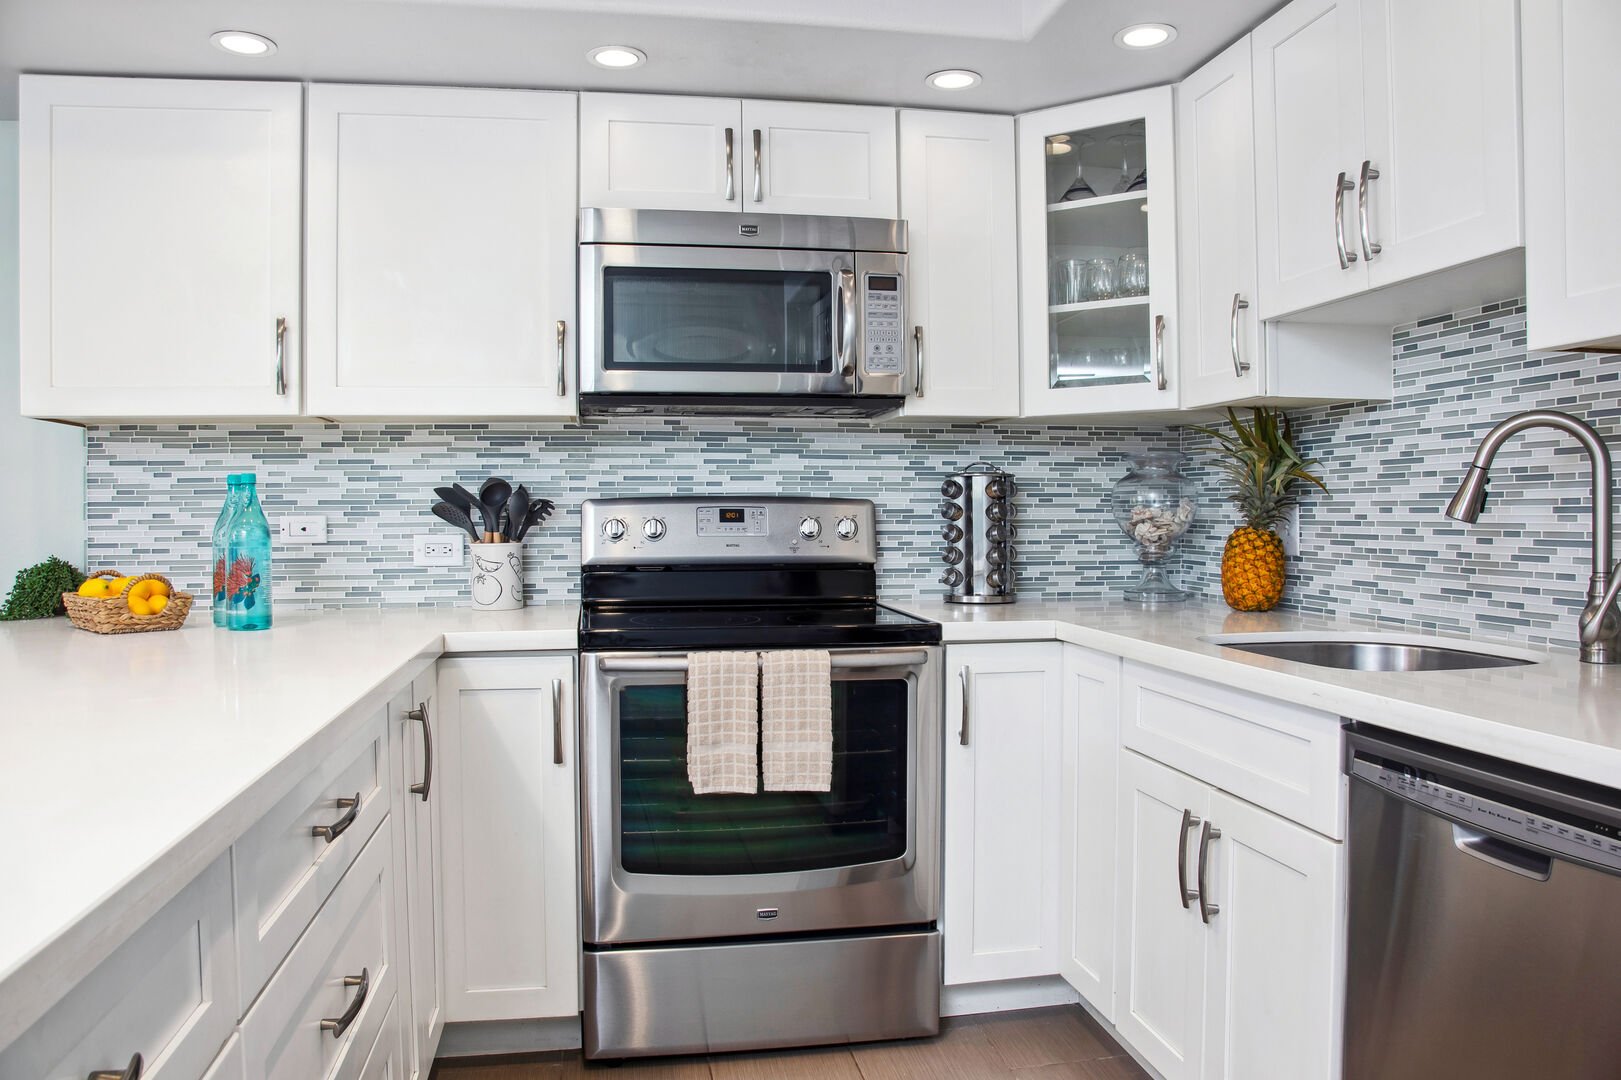 Cook delicious meals in this fully equipped kitchen with full-size appliances.